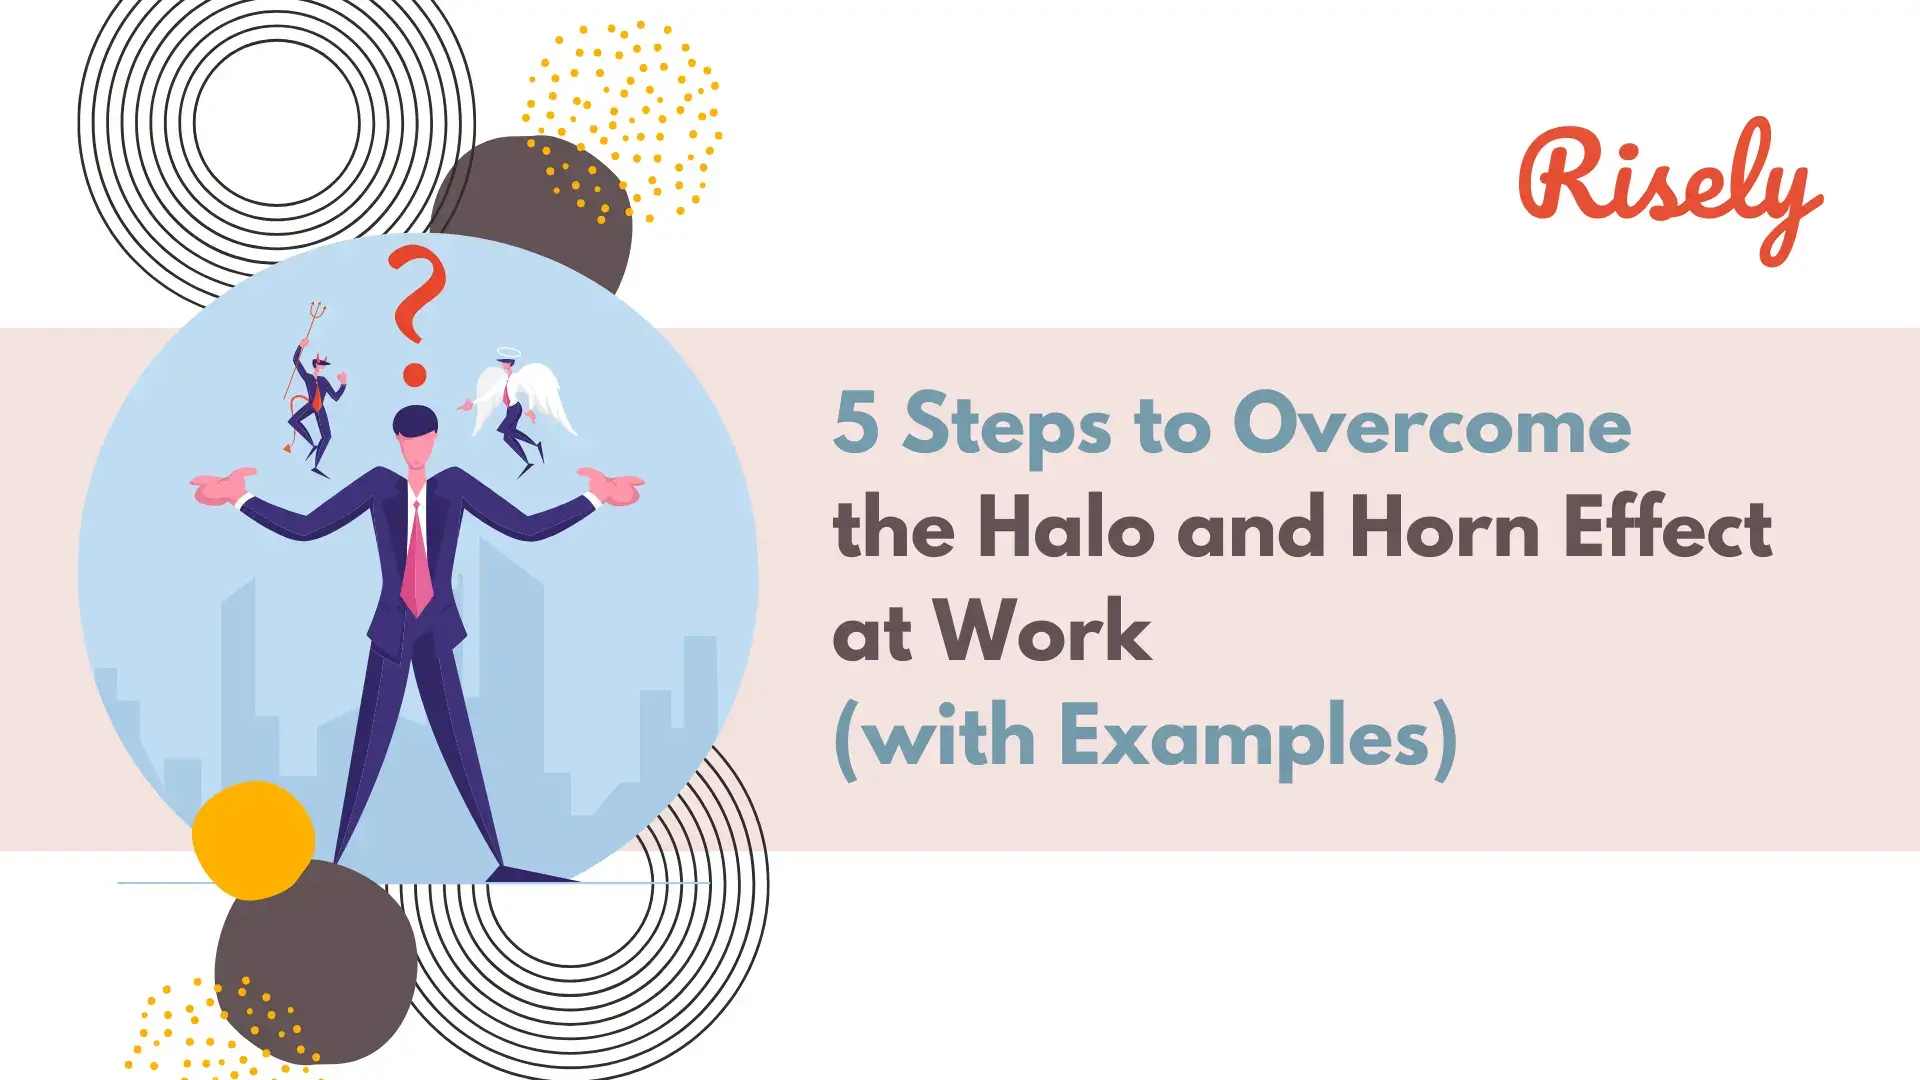 5 Steps to Overcome the Halo and Horn Effect at Work (with Examples)